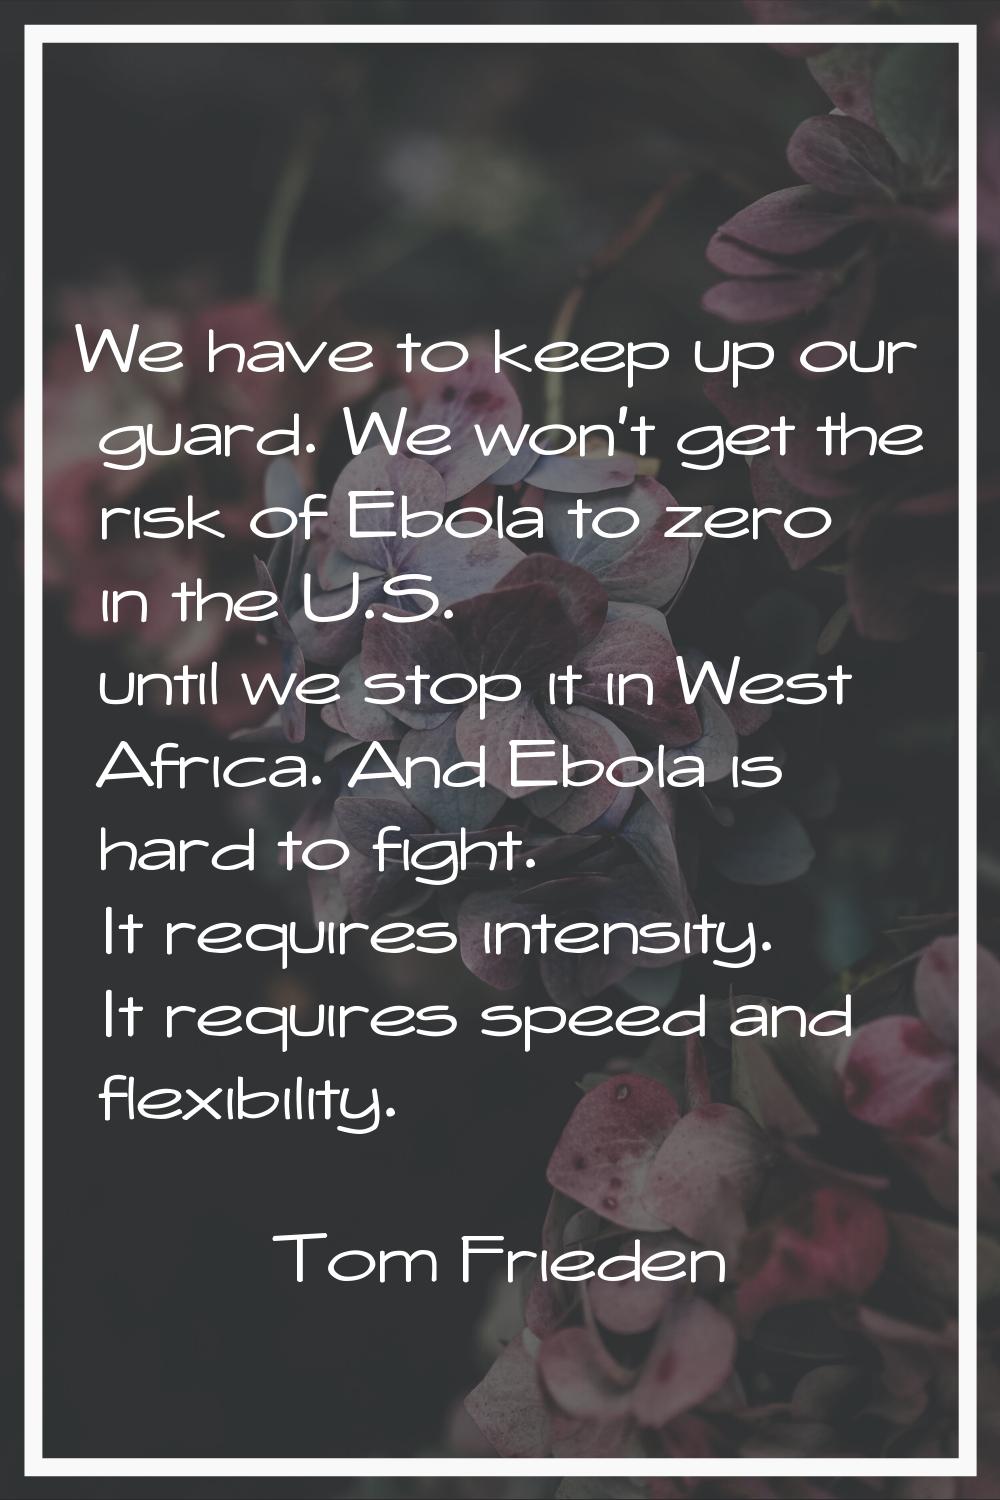 We have to keep up our guard. We won't get the risk of Ebola to zero in the U.S. until we stop it i